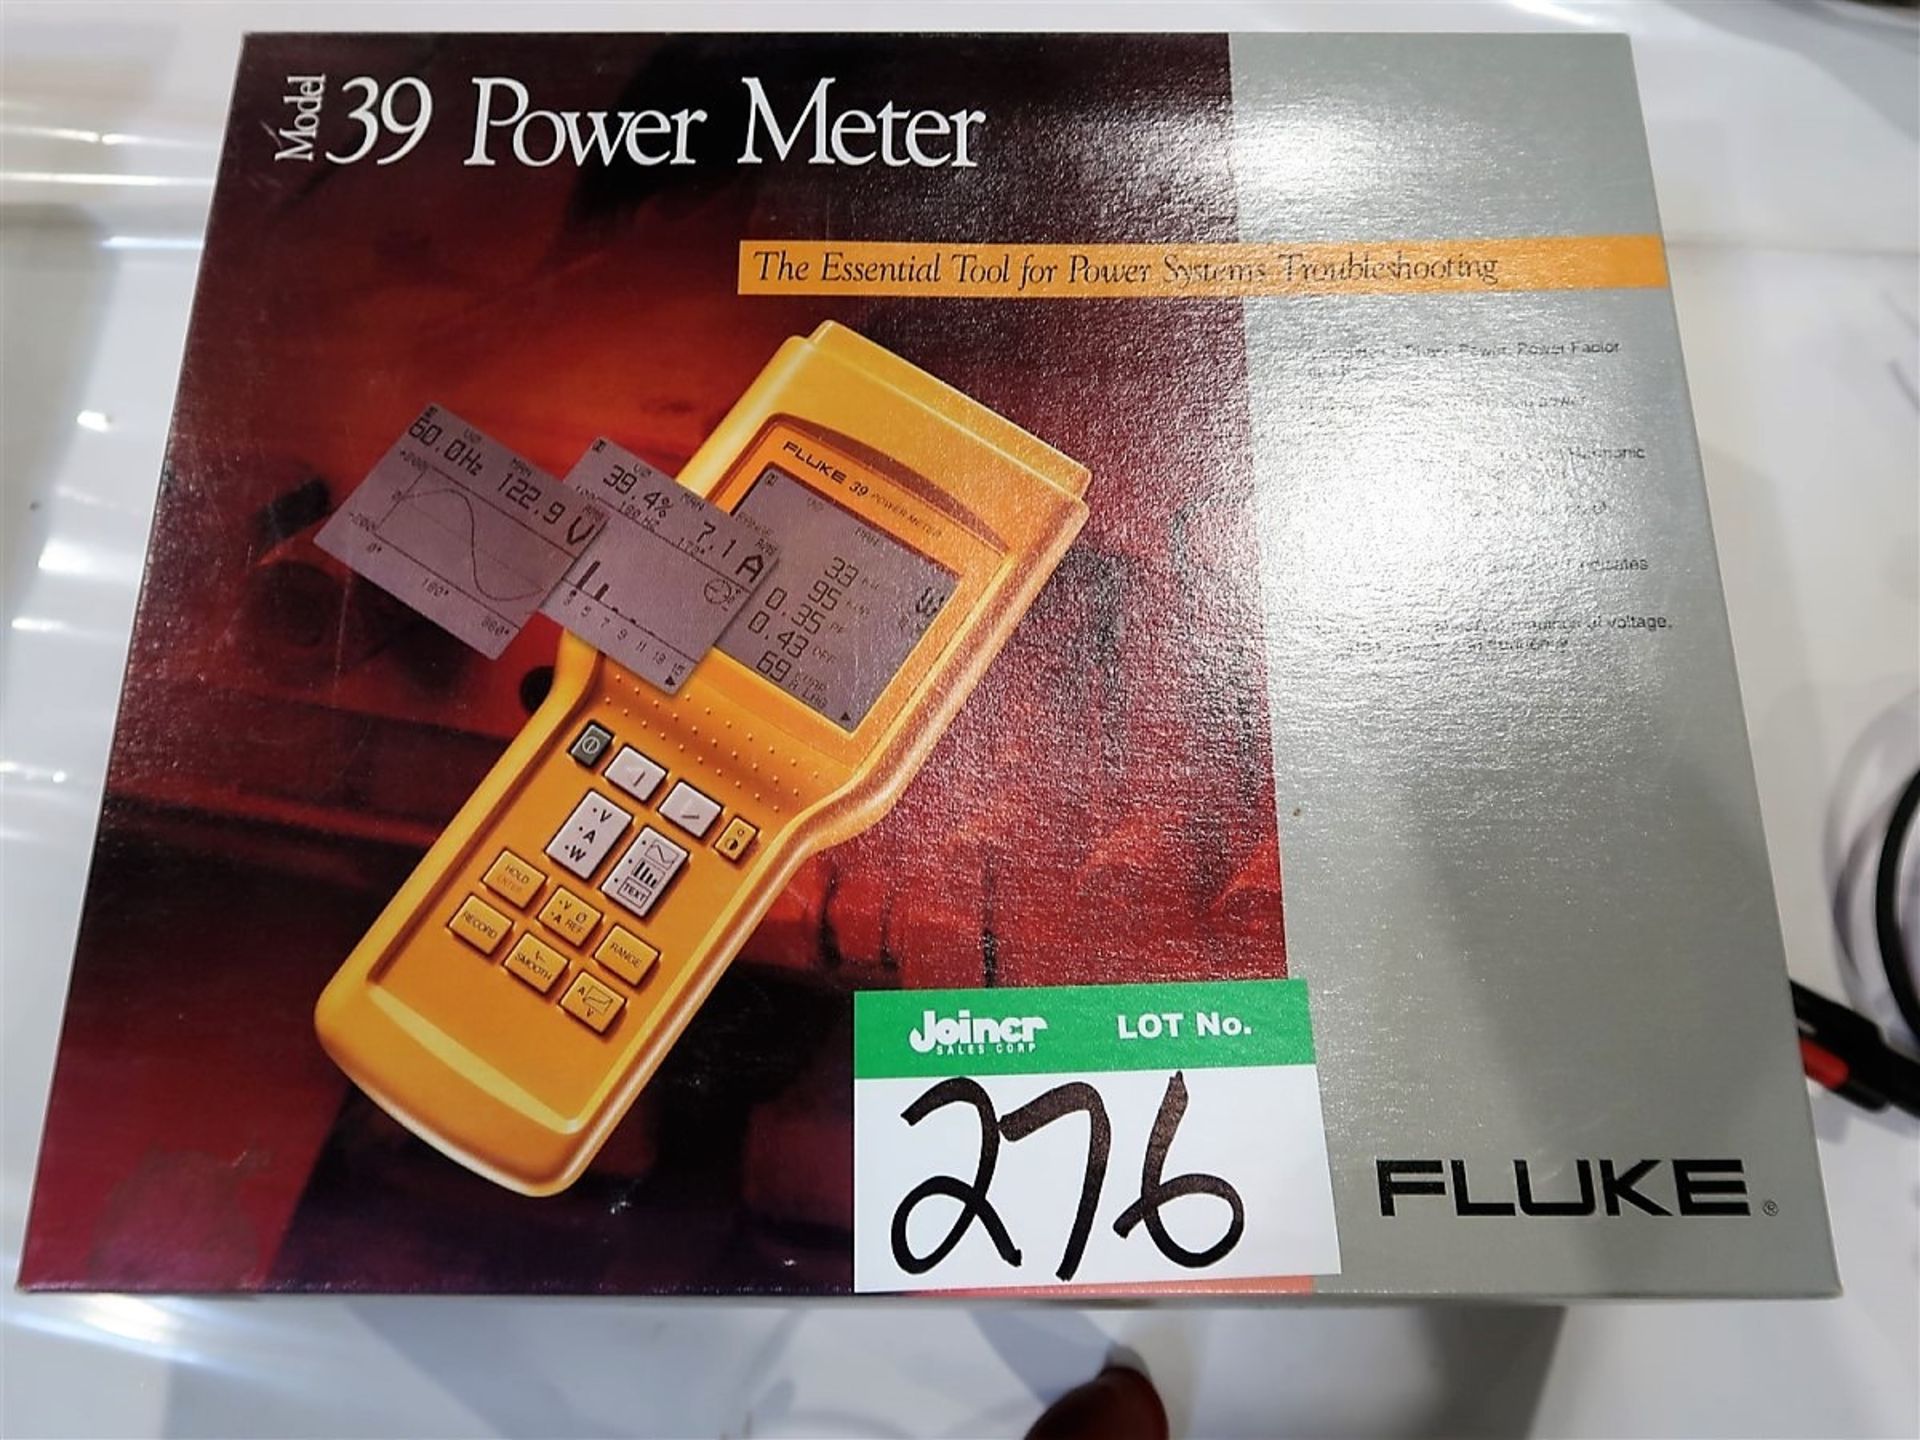 FLUKE MOD. 39 POWER METER C/W MANUALS AND ATTACHMENTS